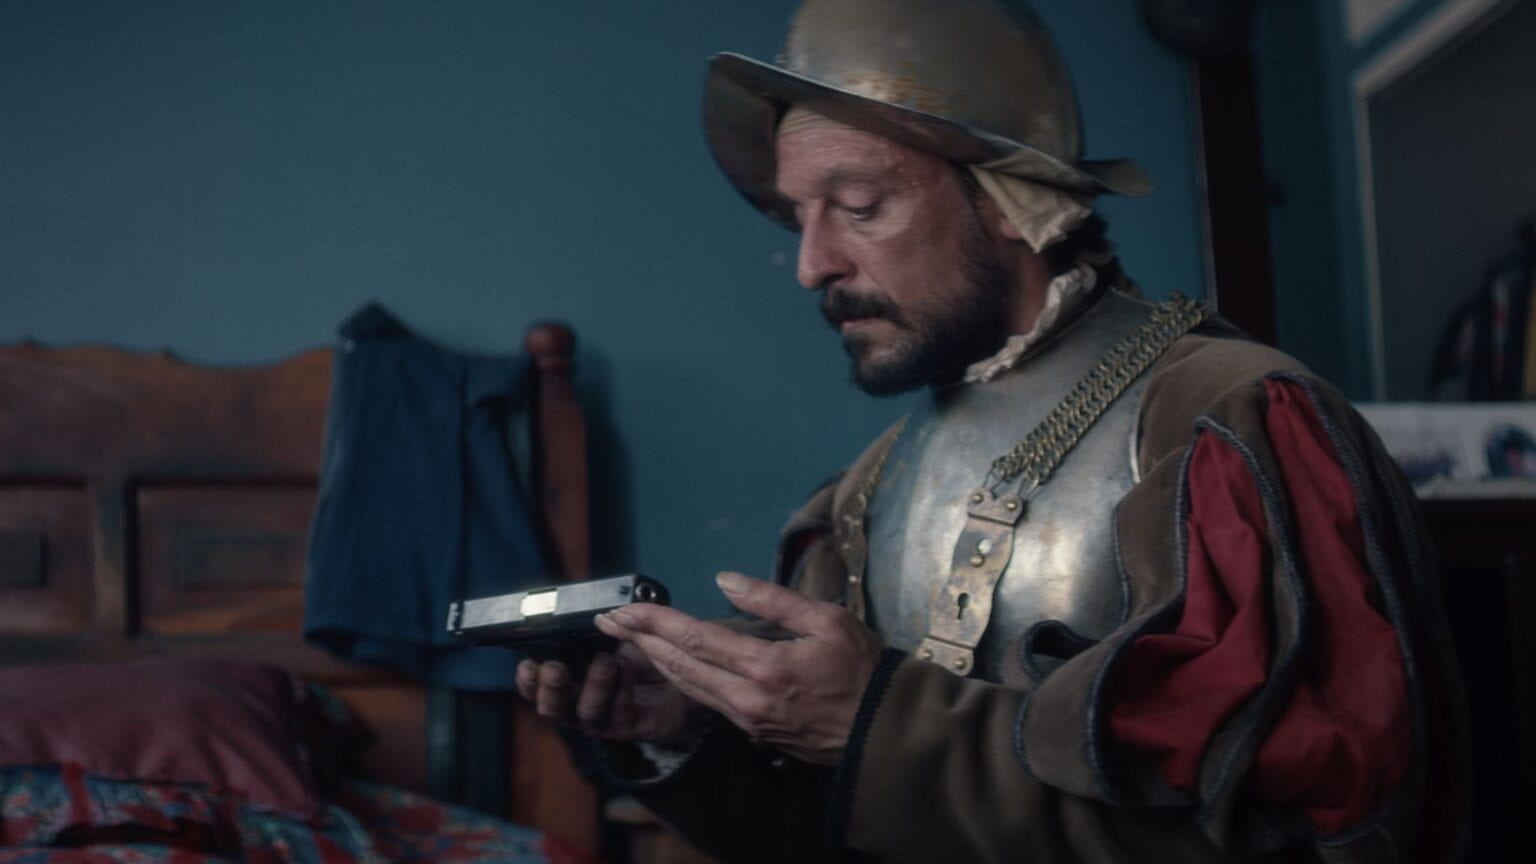 A conquistador holds and looks at a gun